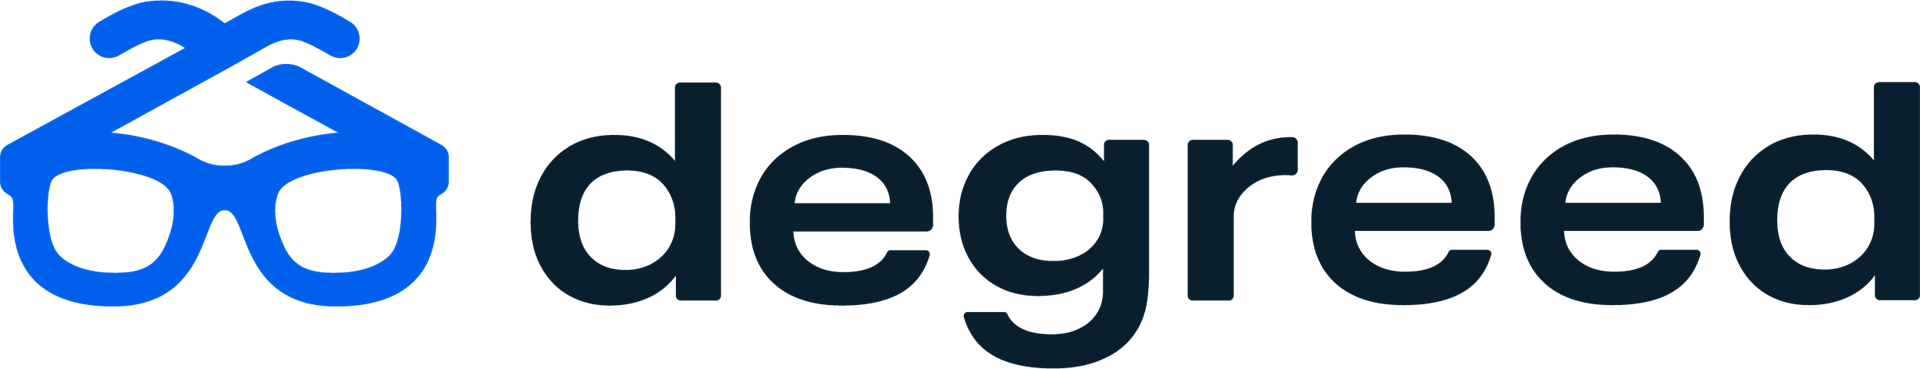 Degreed is a gold level sponsor of ATD RMC. Thank you Degreed.